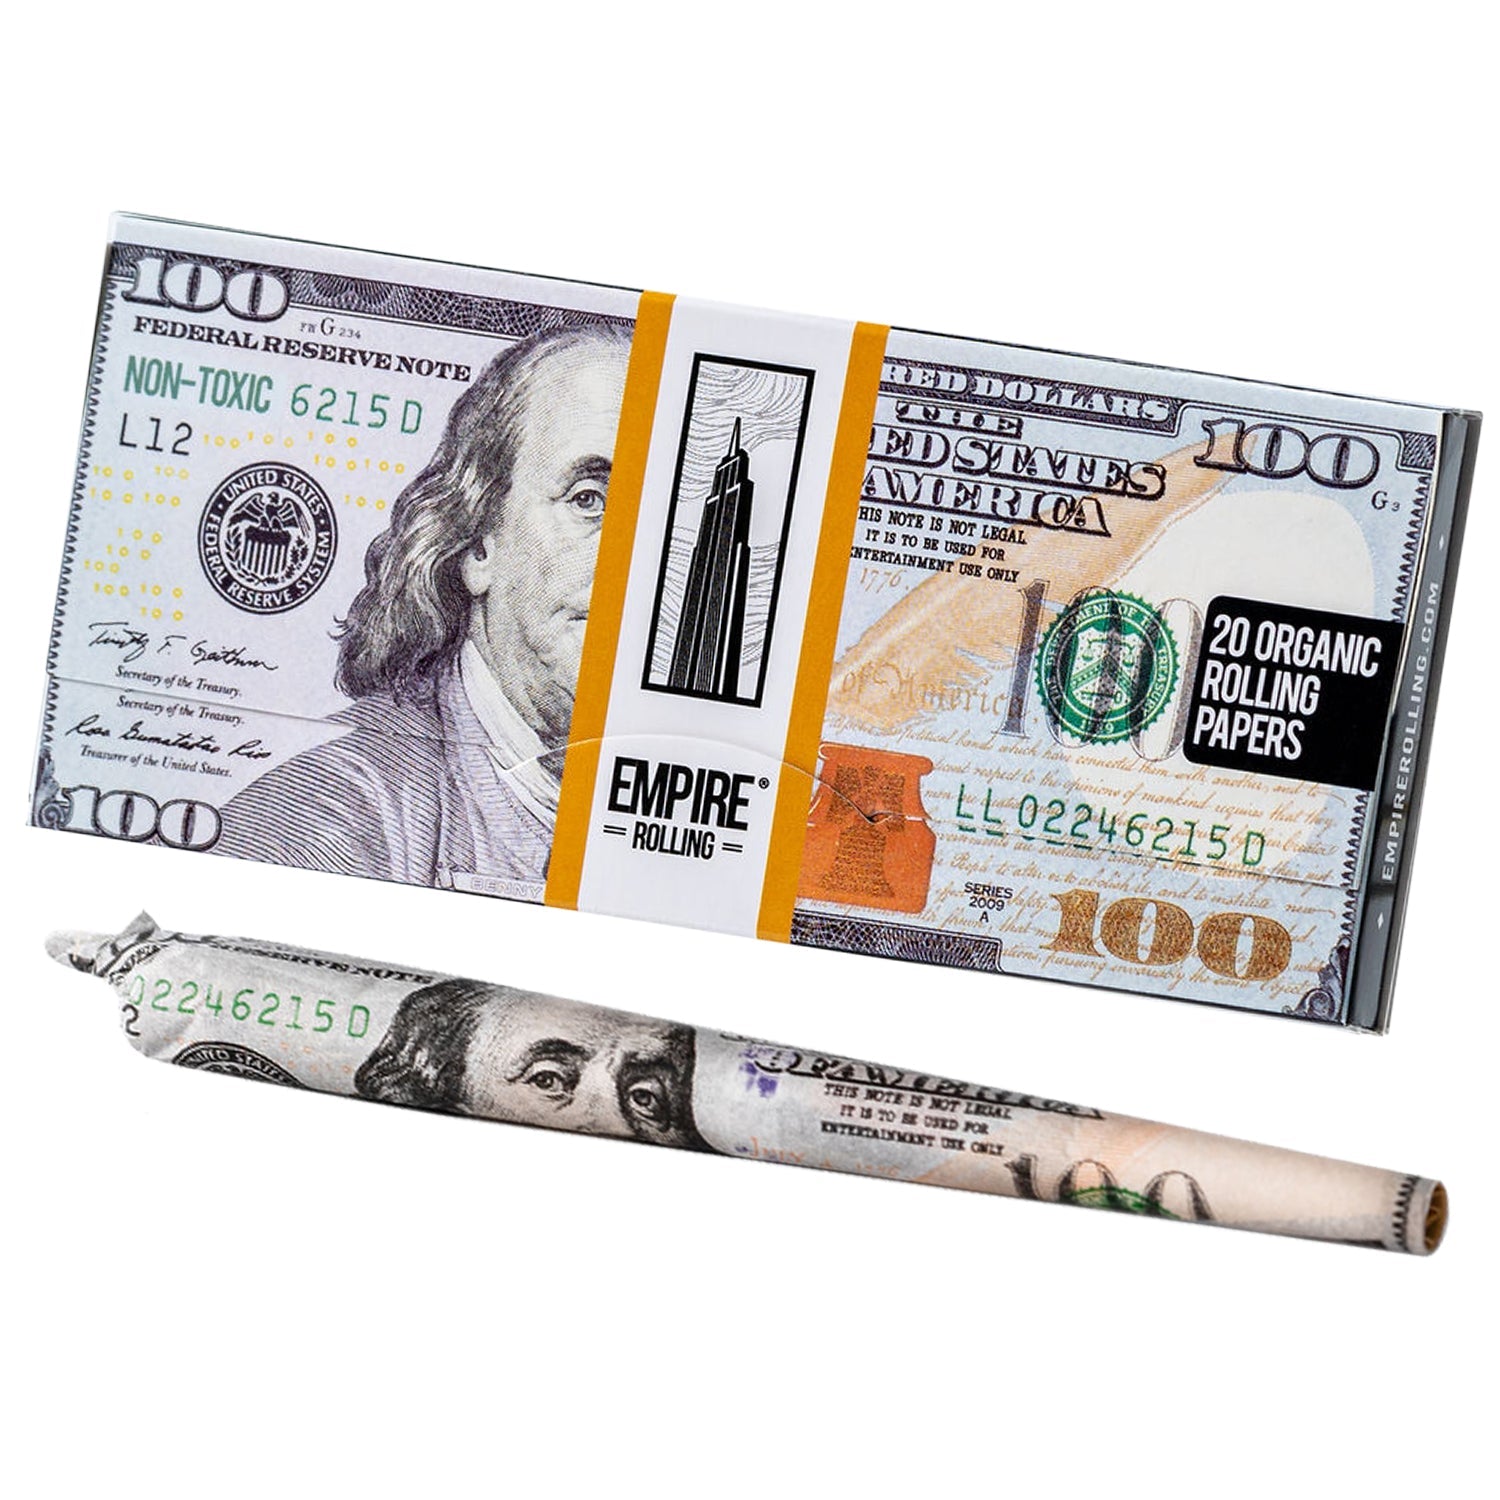 Empire Rolling's King Size Organic Hemp Rolling Papers, eco-friendly and crafted with high-quality, natural materials for a premium smoking experience.BENNY Wallet - Empire Rolling Papers